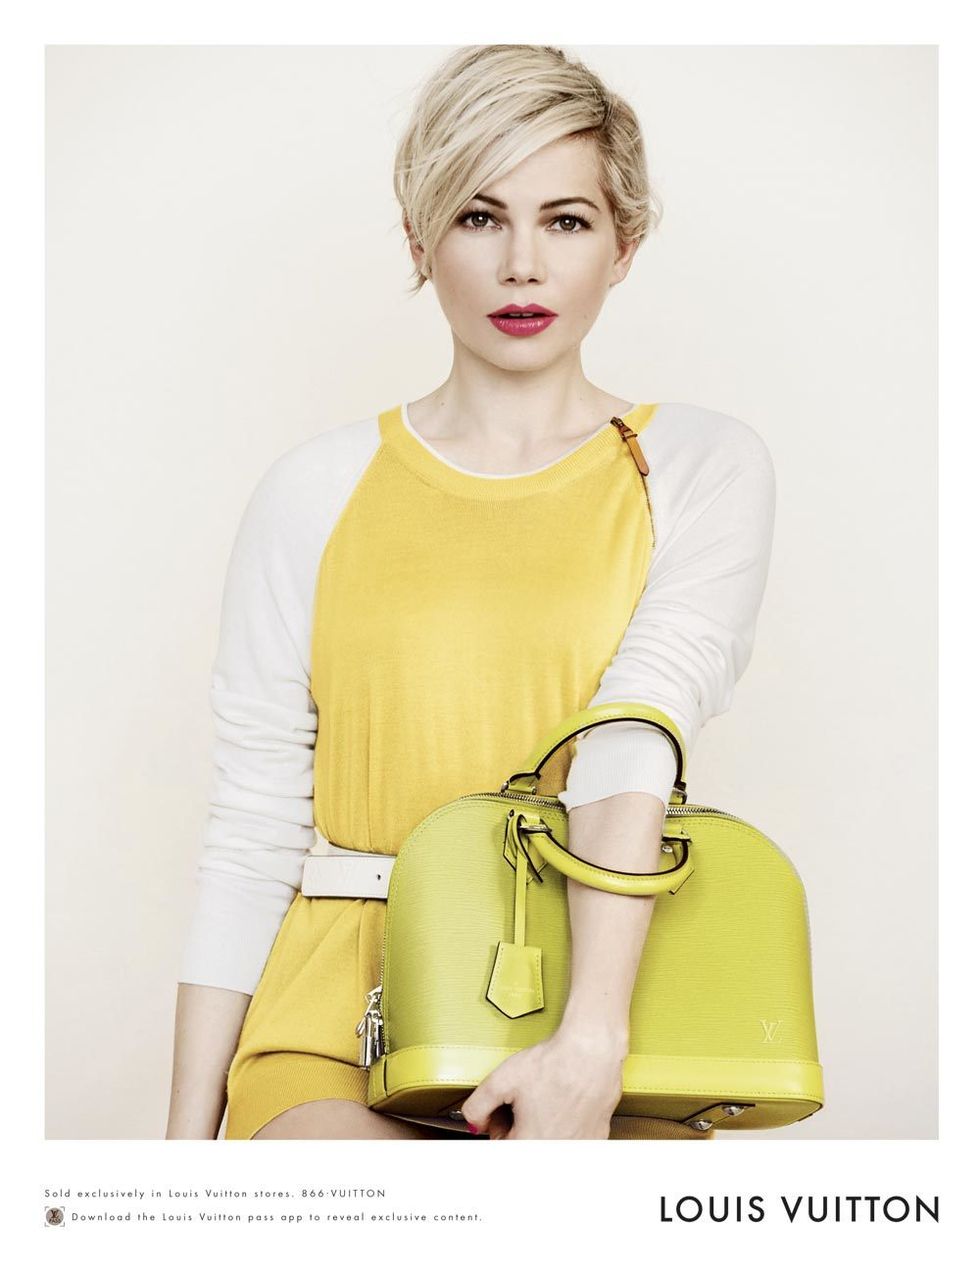 SHADES OF CAPUCINES WITH MICHELLE WILLIAMS - News